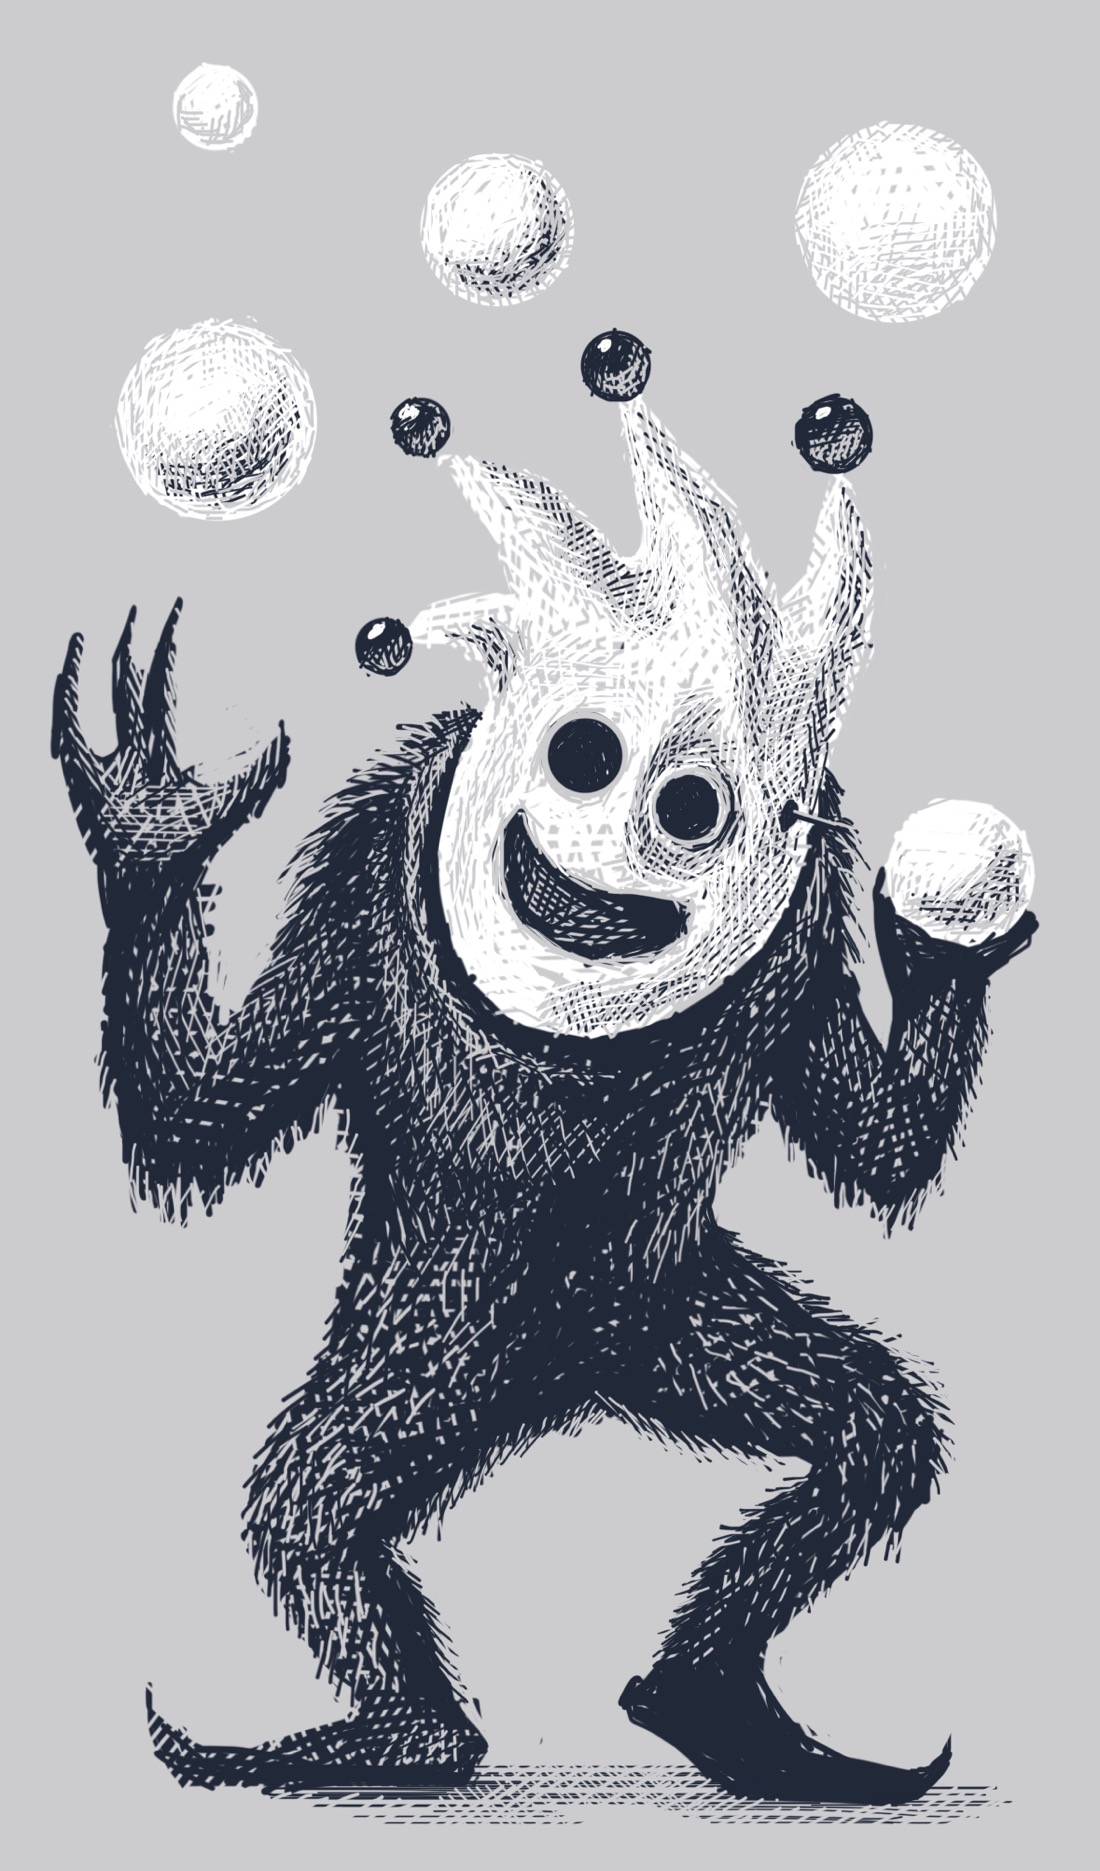 A black, furry, slightly hunched over creature dances while juggling balls. The creature is wearing a mask that looks vaguely like a jester's face and cap, except more minimal and eerie: blank and white, with black holes for eyes and a mouth.